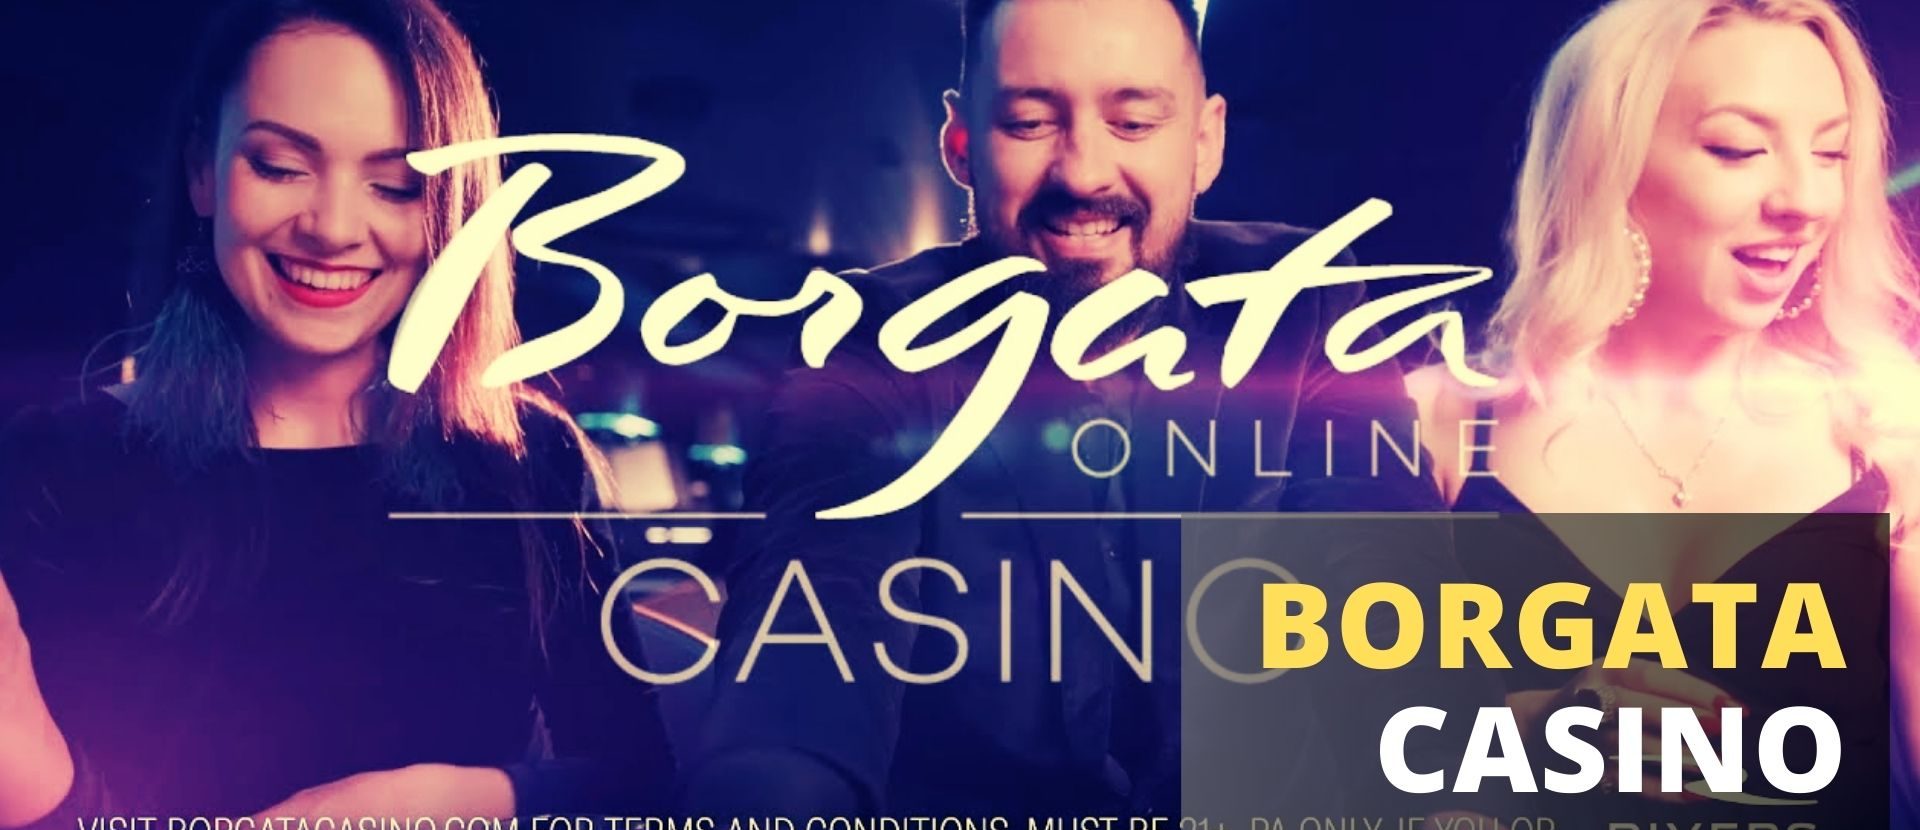 Experience high-stakes gambling and sports betting at Borgata's Casino platform for a chance to win big